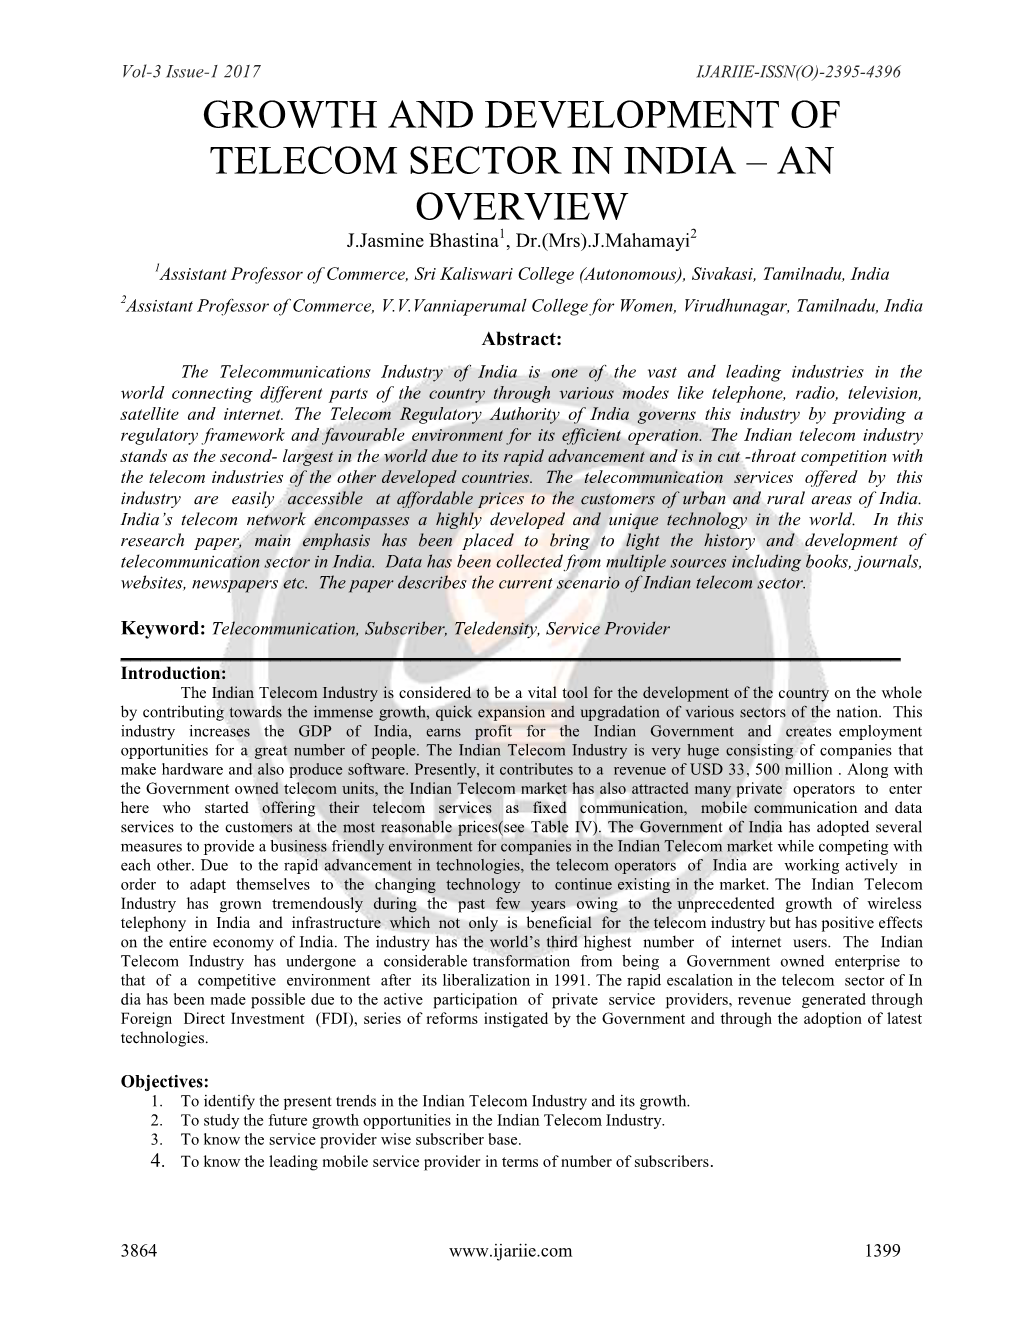 Growth and Development of Telecom Sector In